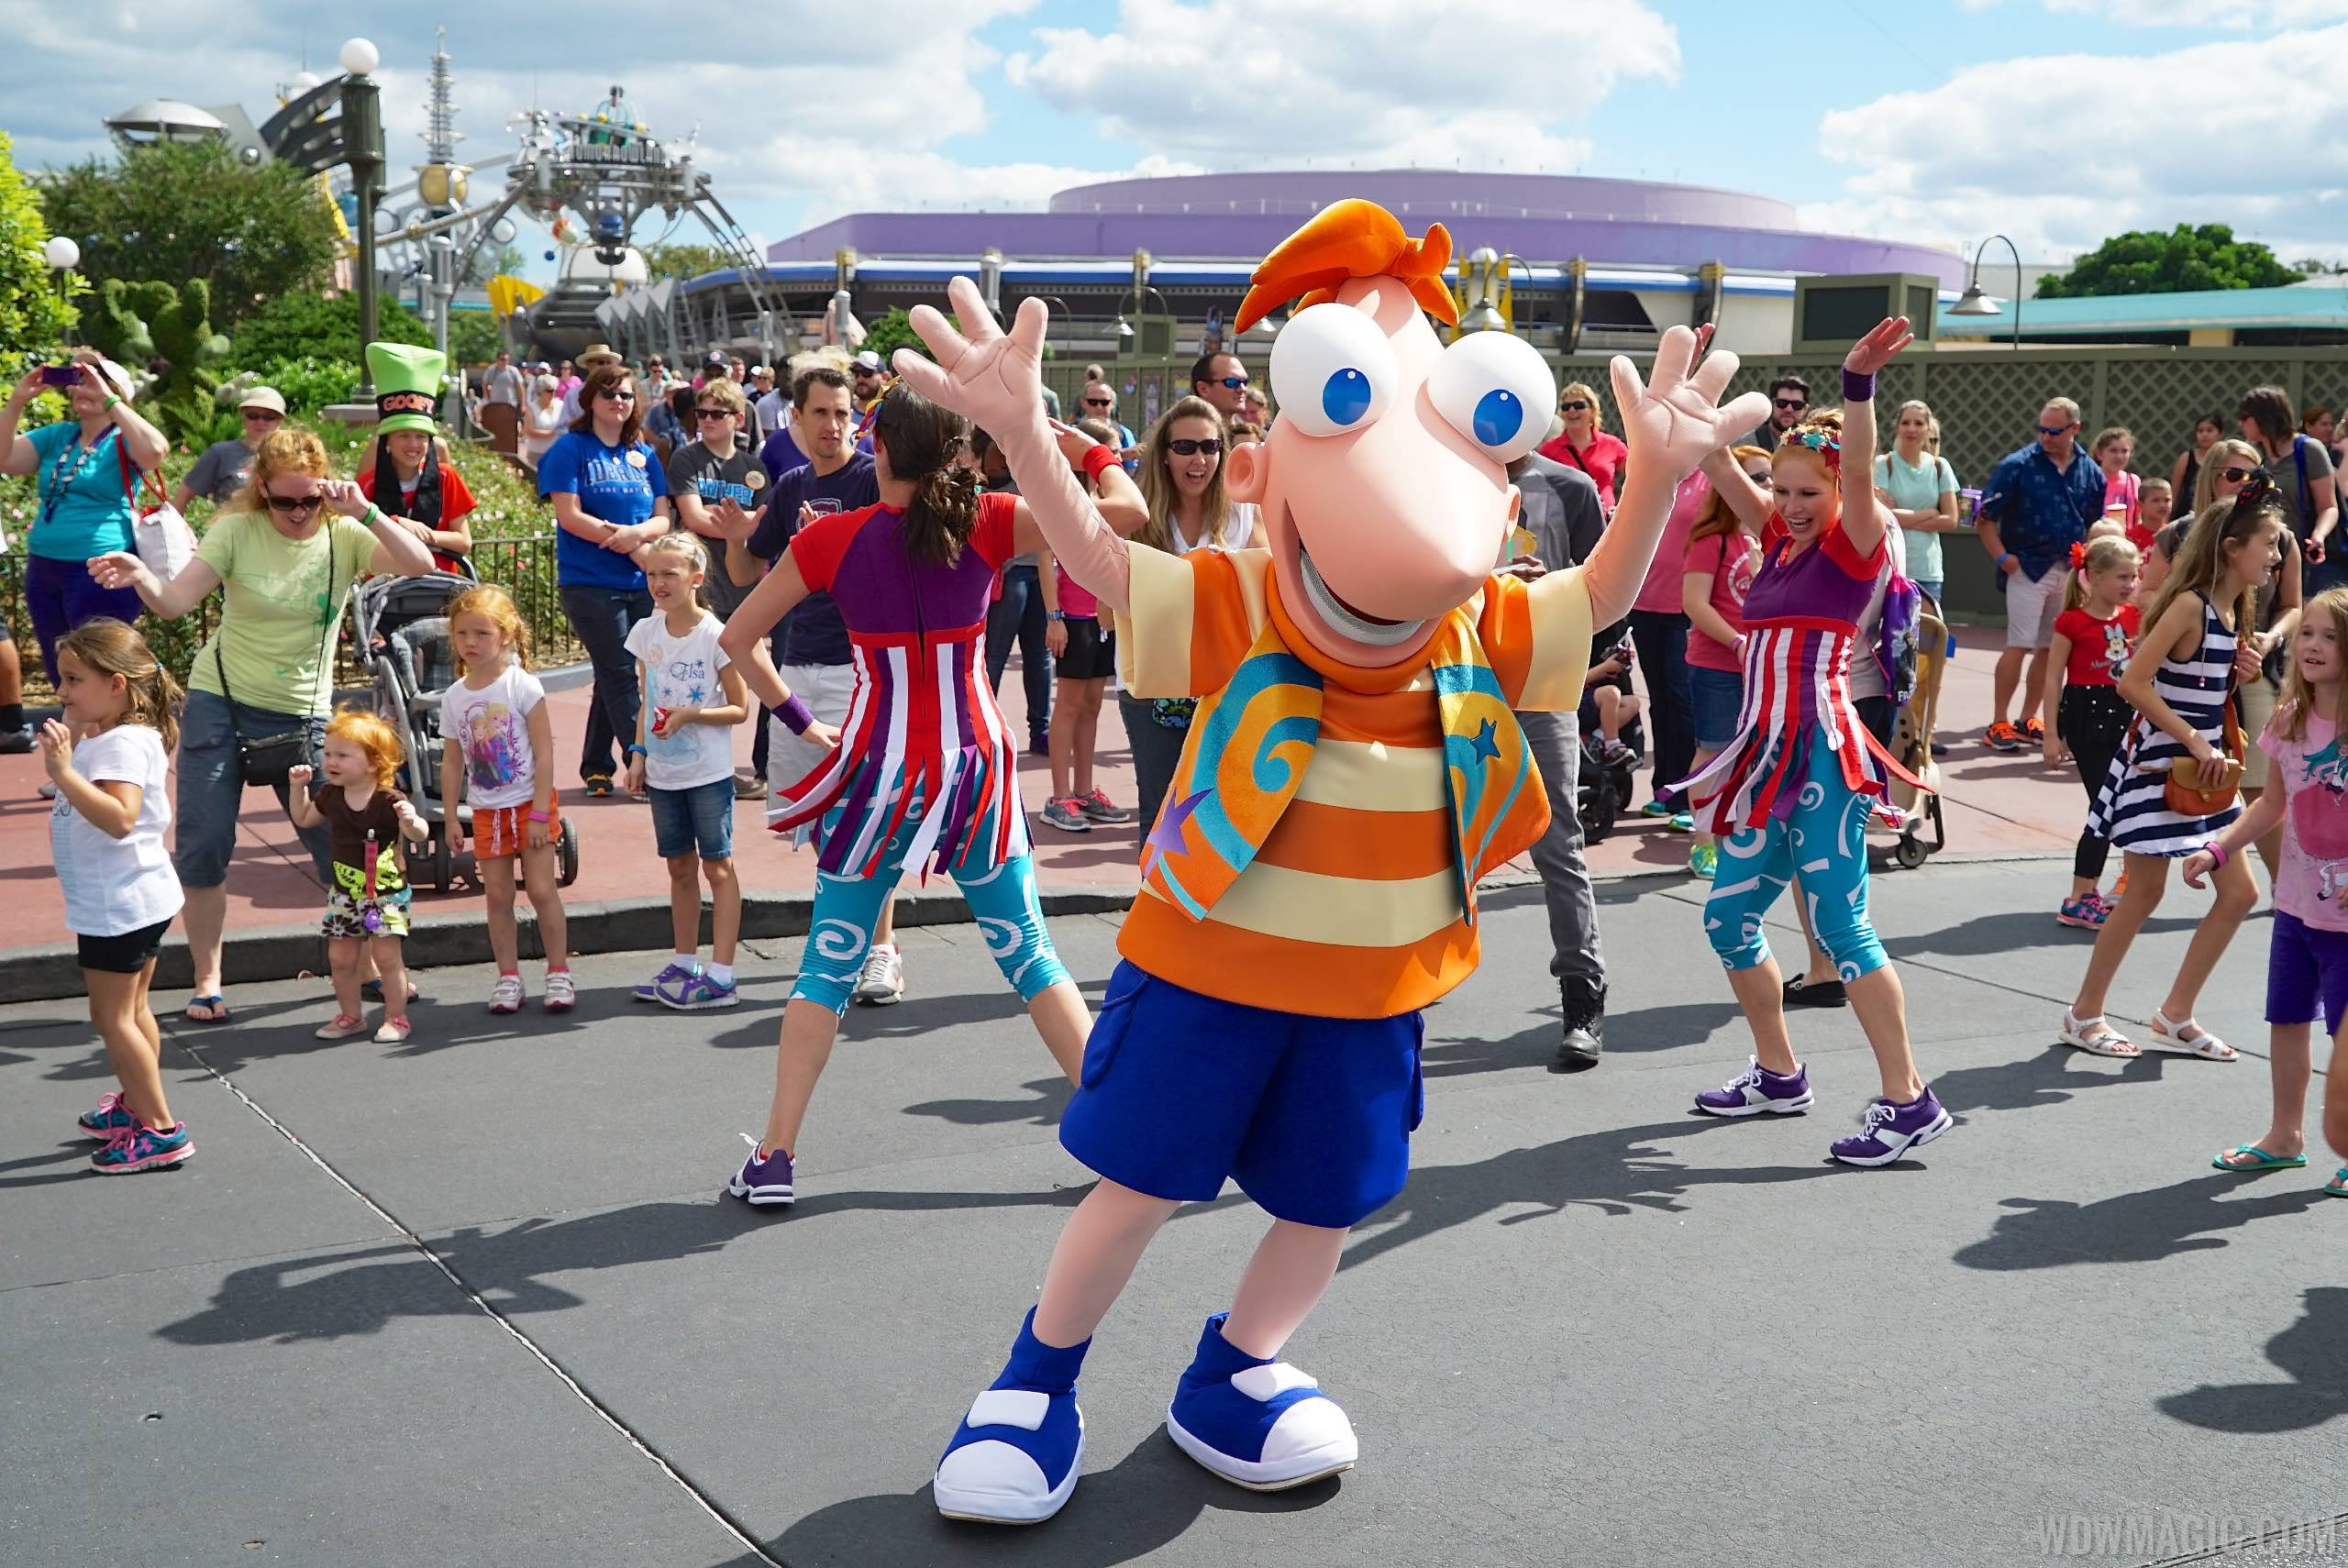 'Move It, Shake It, Celebrate It! Street Party' performances restricted to evenings only on select days next week